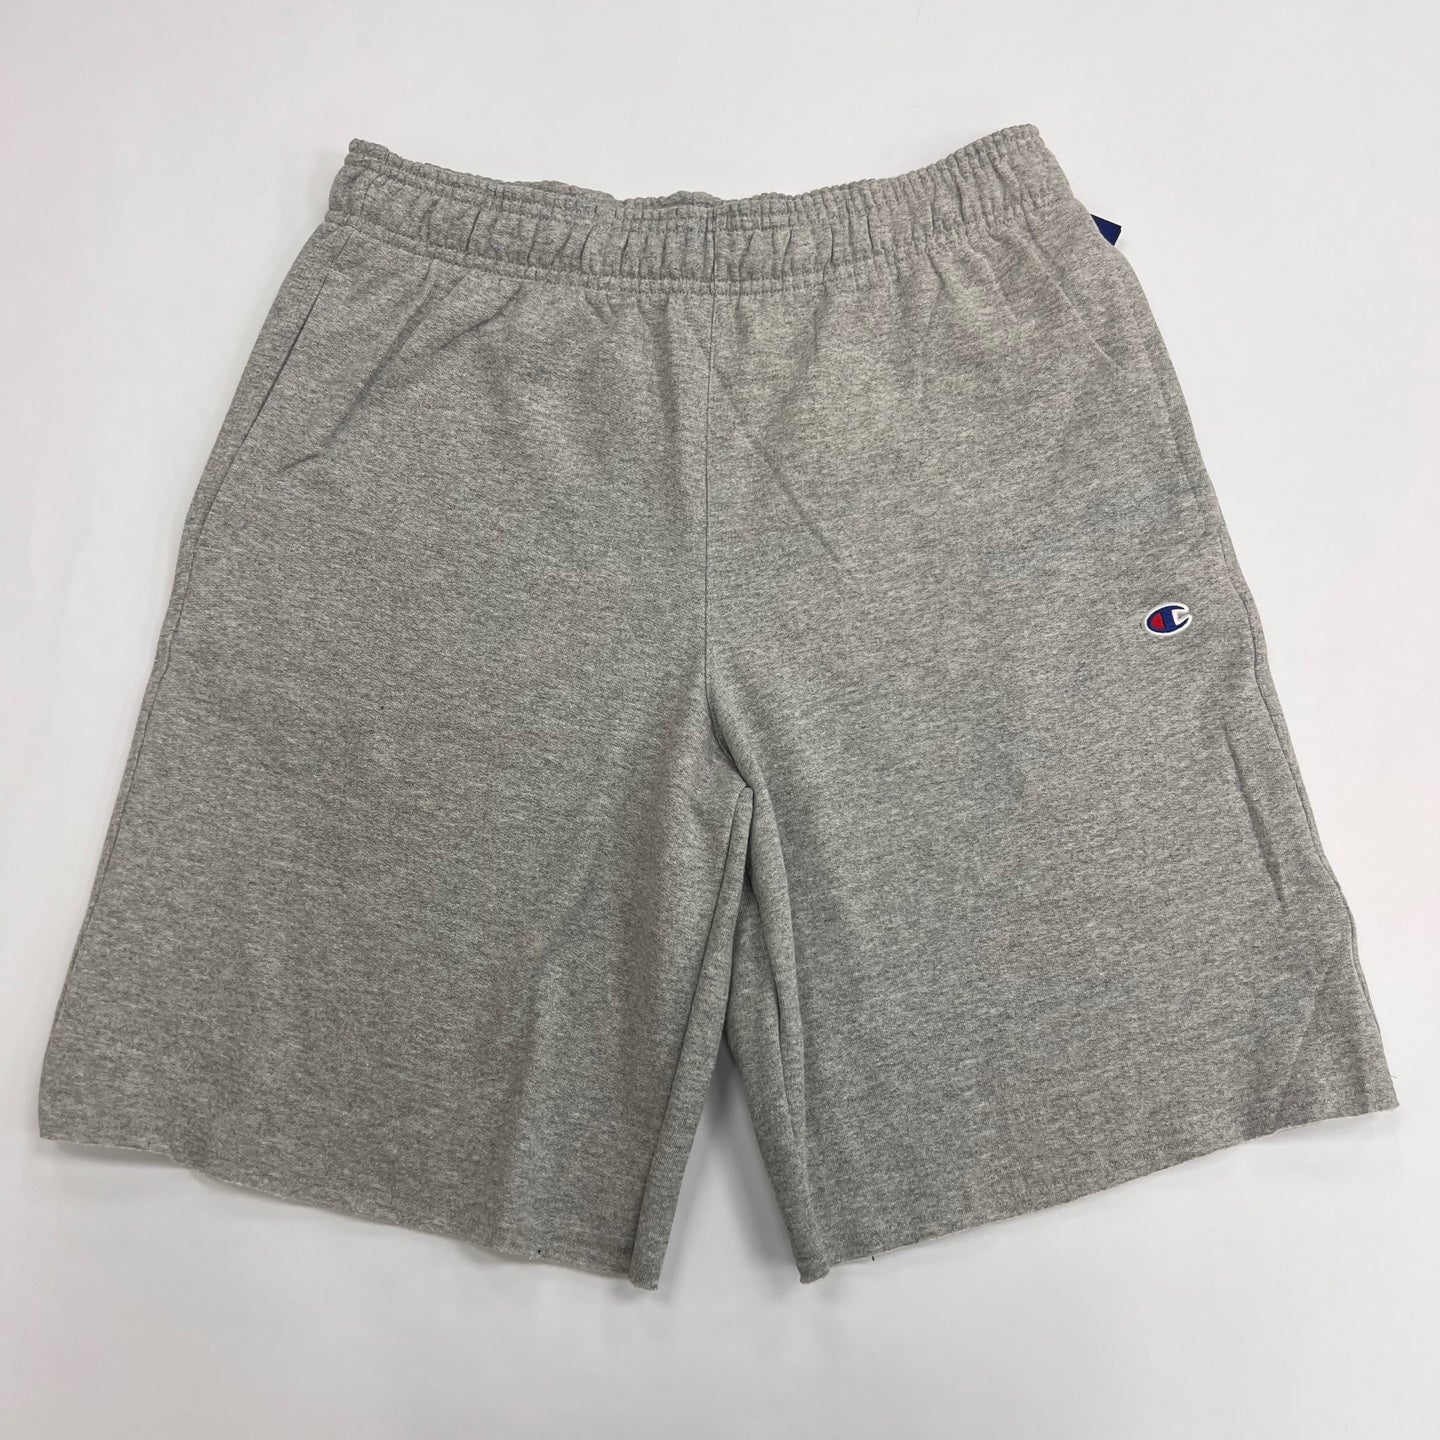 Champion Powerblend Fleece Shorts - 10 Inches